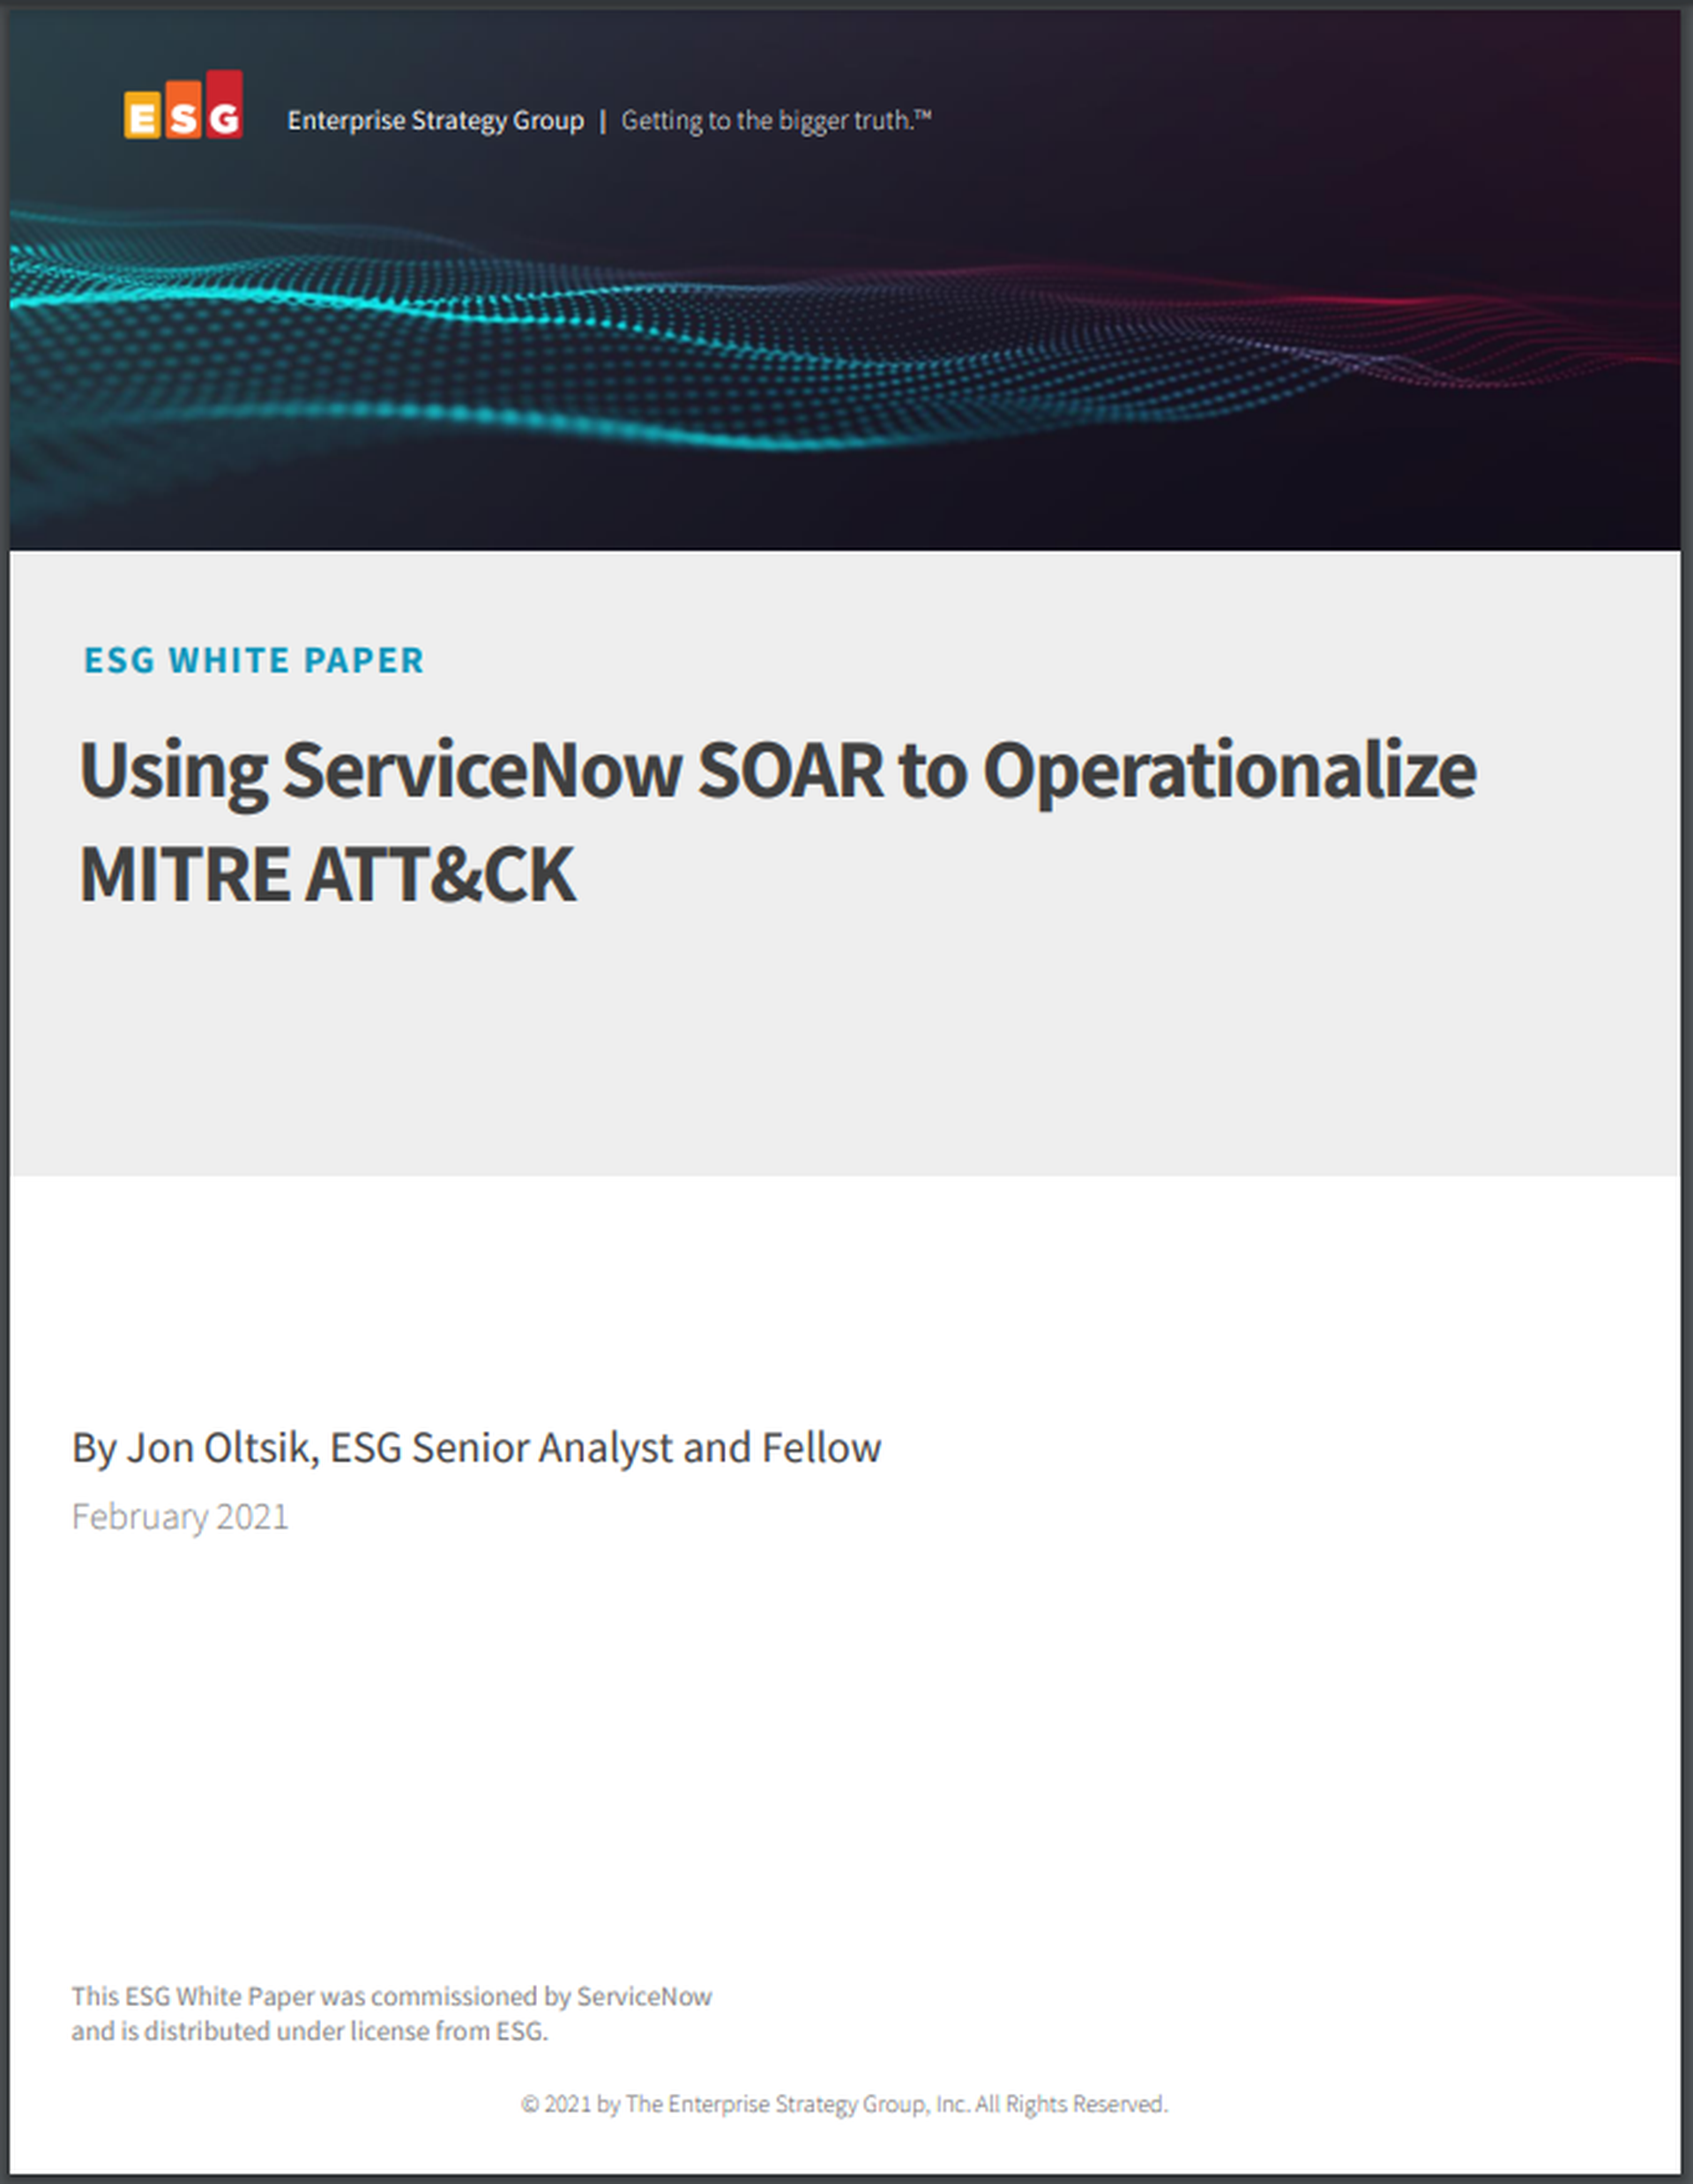 Using ServiceNow SOAR to Operationalize MITRE ATT&CK